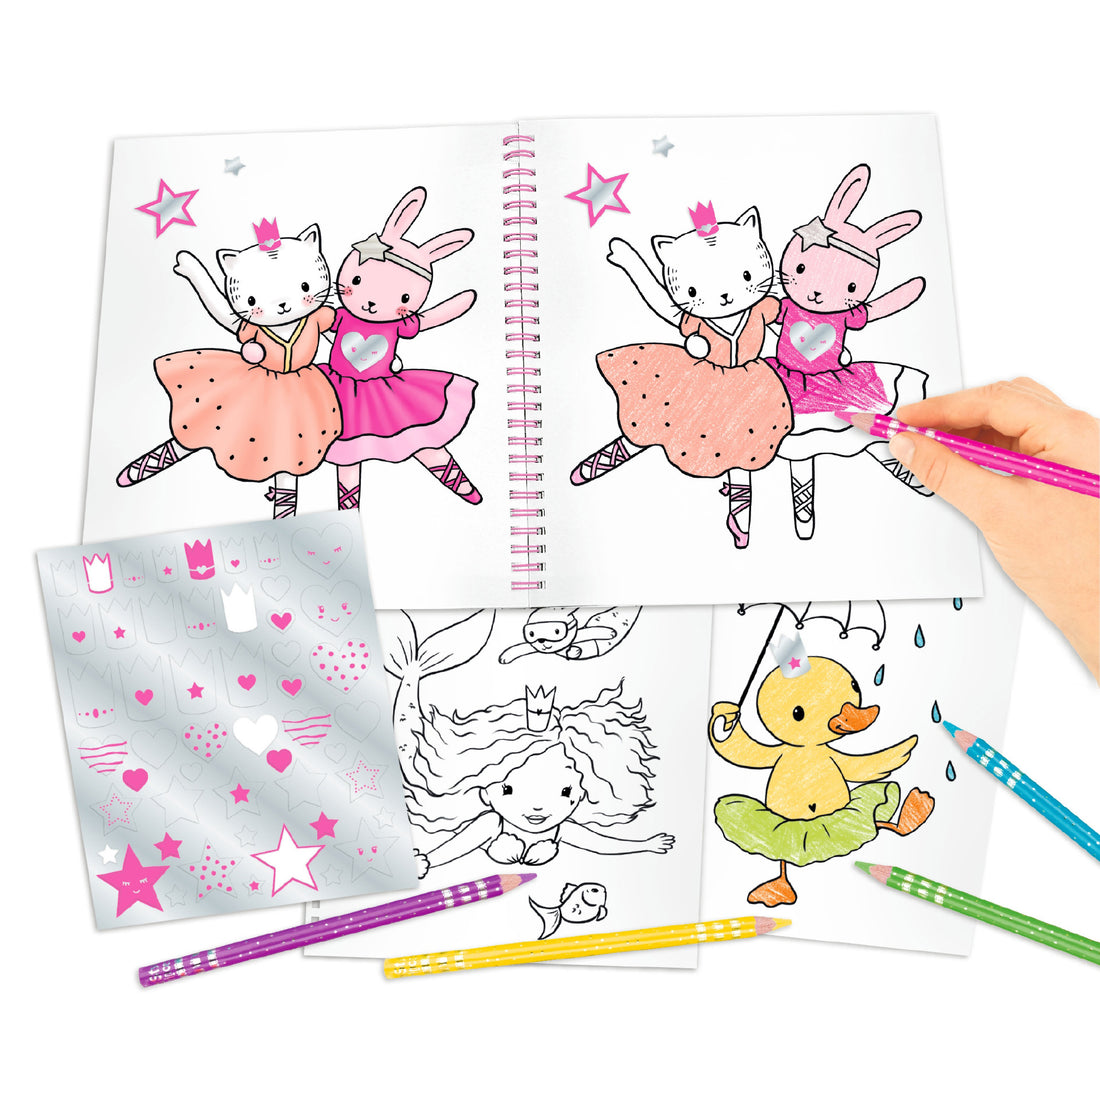 depesche-princess-mimi-colouring-book-with-sequins-pink-heart-animals- (7)